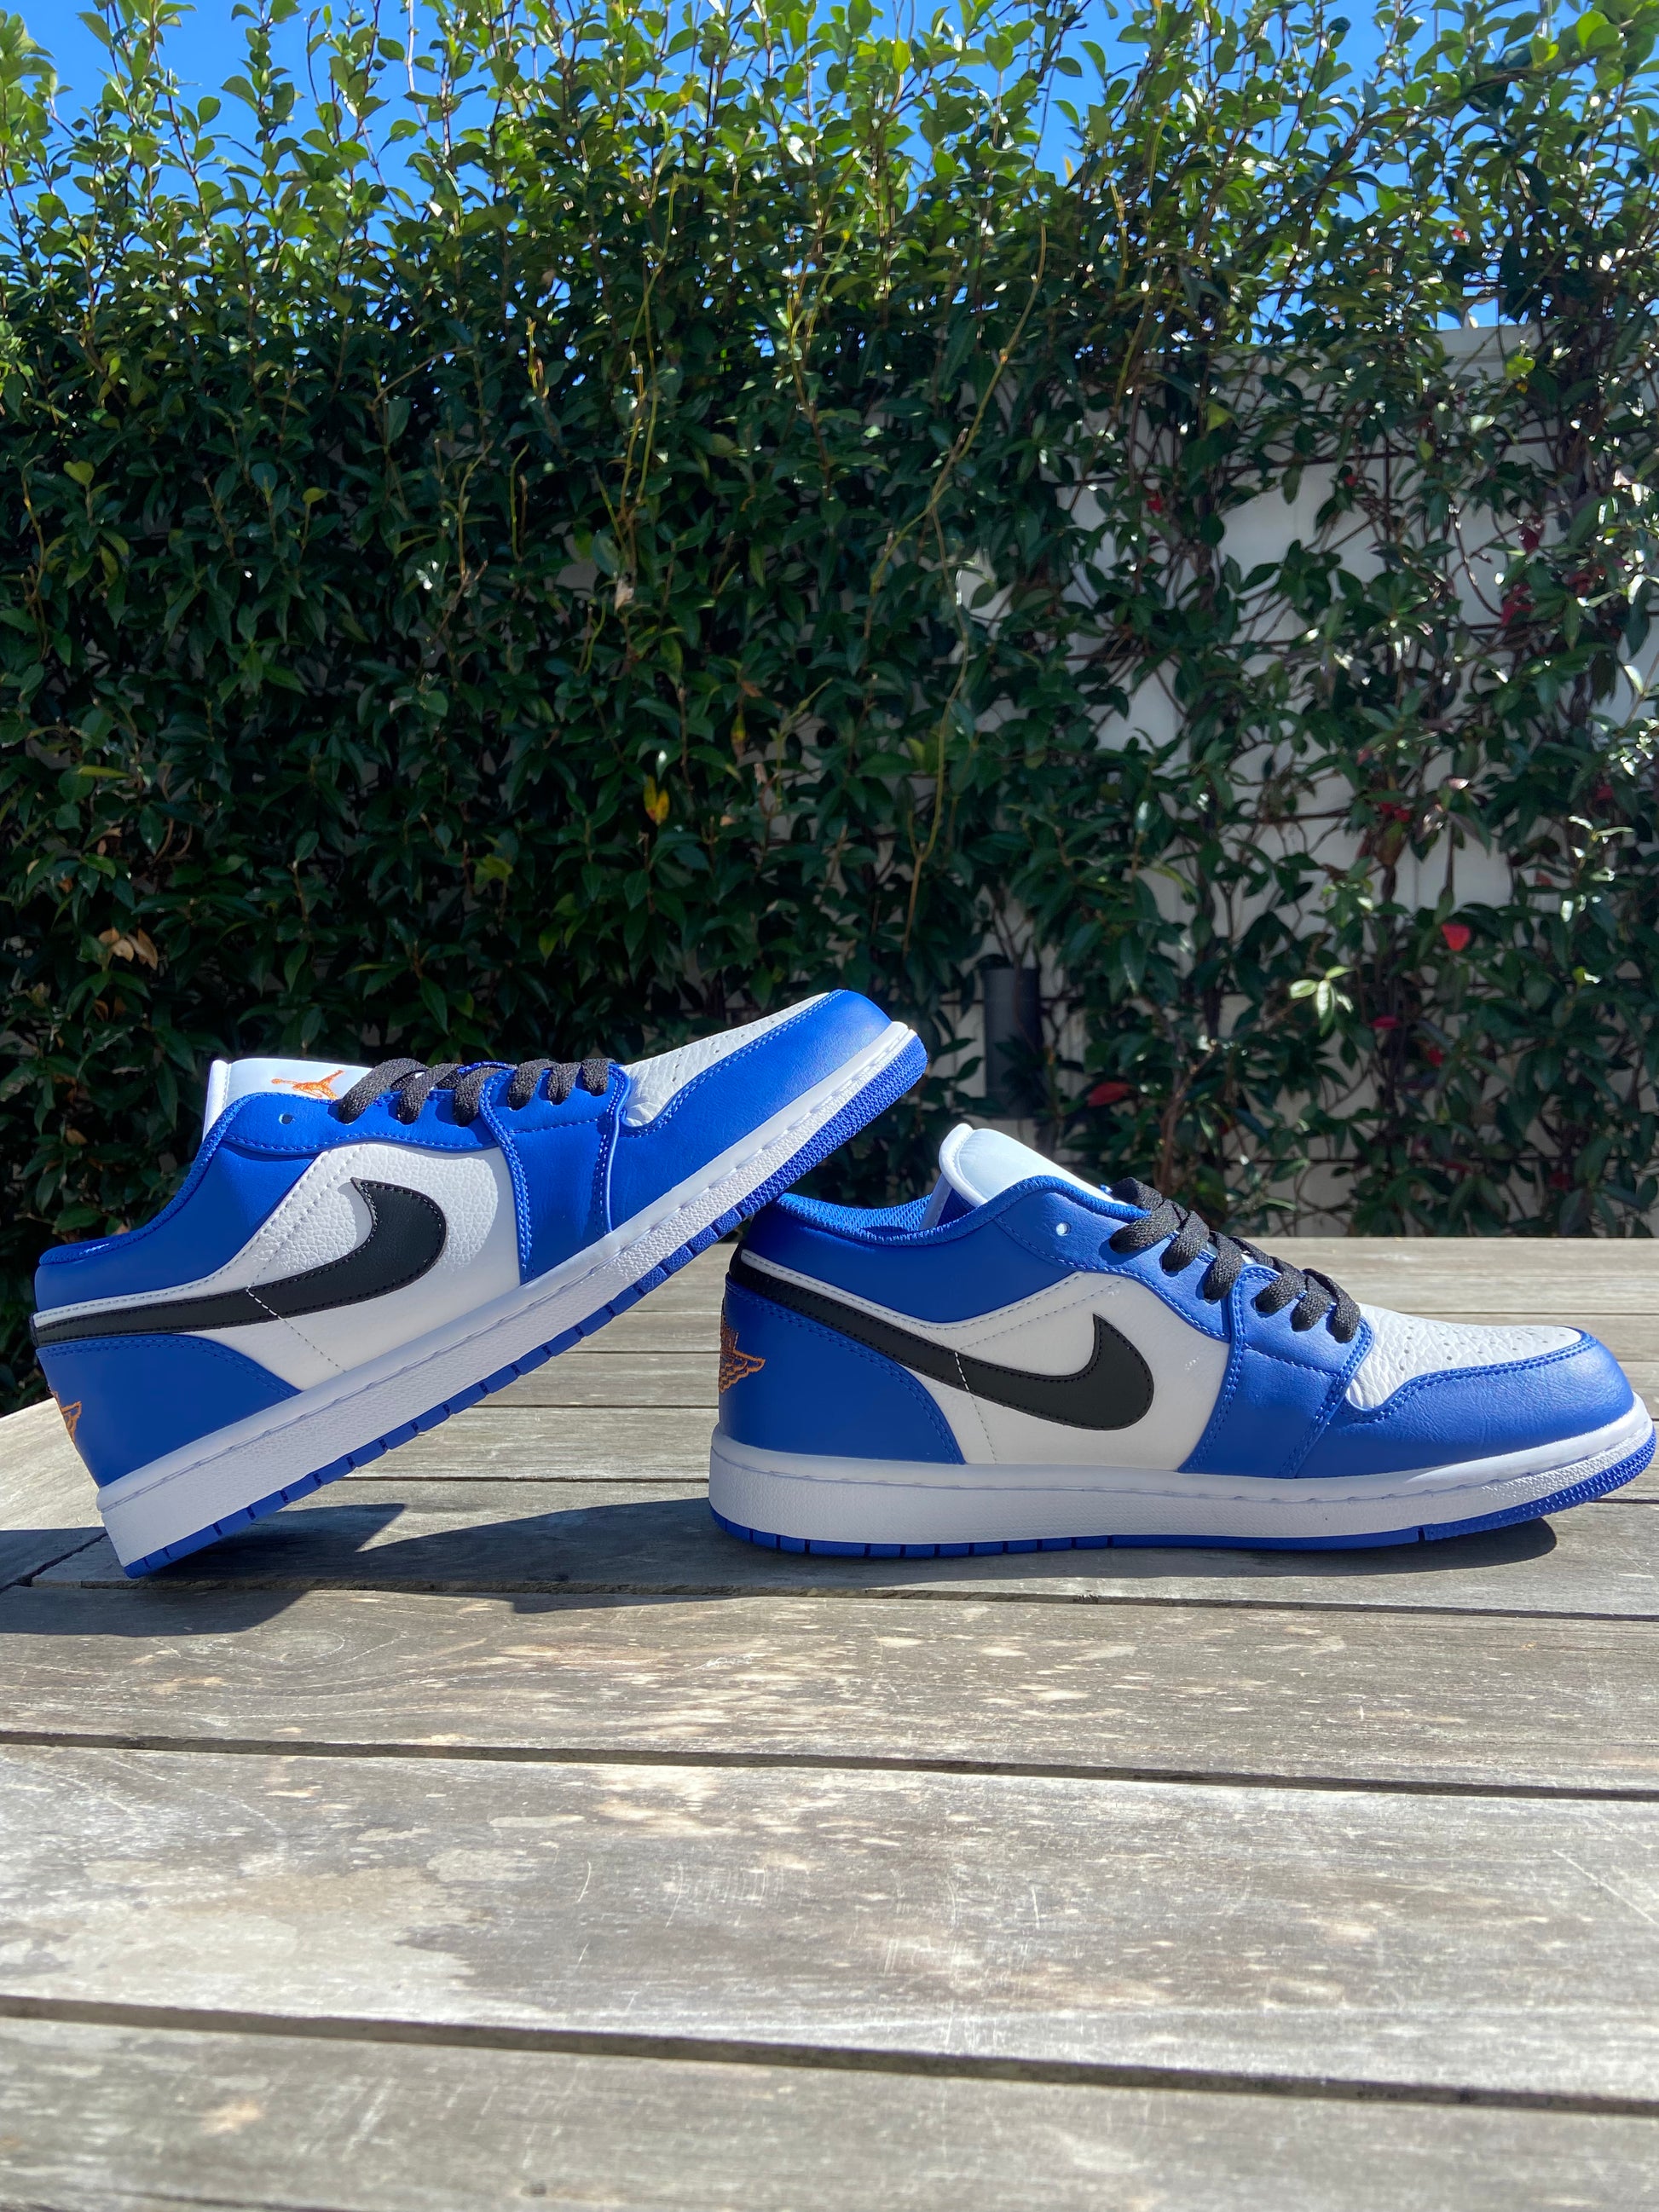 MY THOUGHTS ON THE AIR JORDAN 1 'GAME ROYAL' 